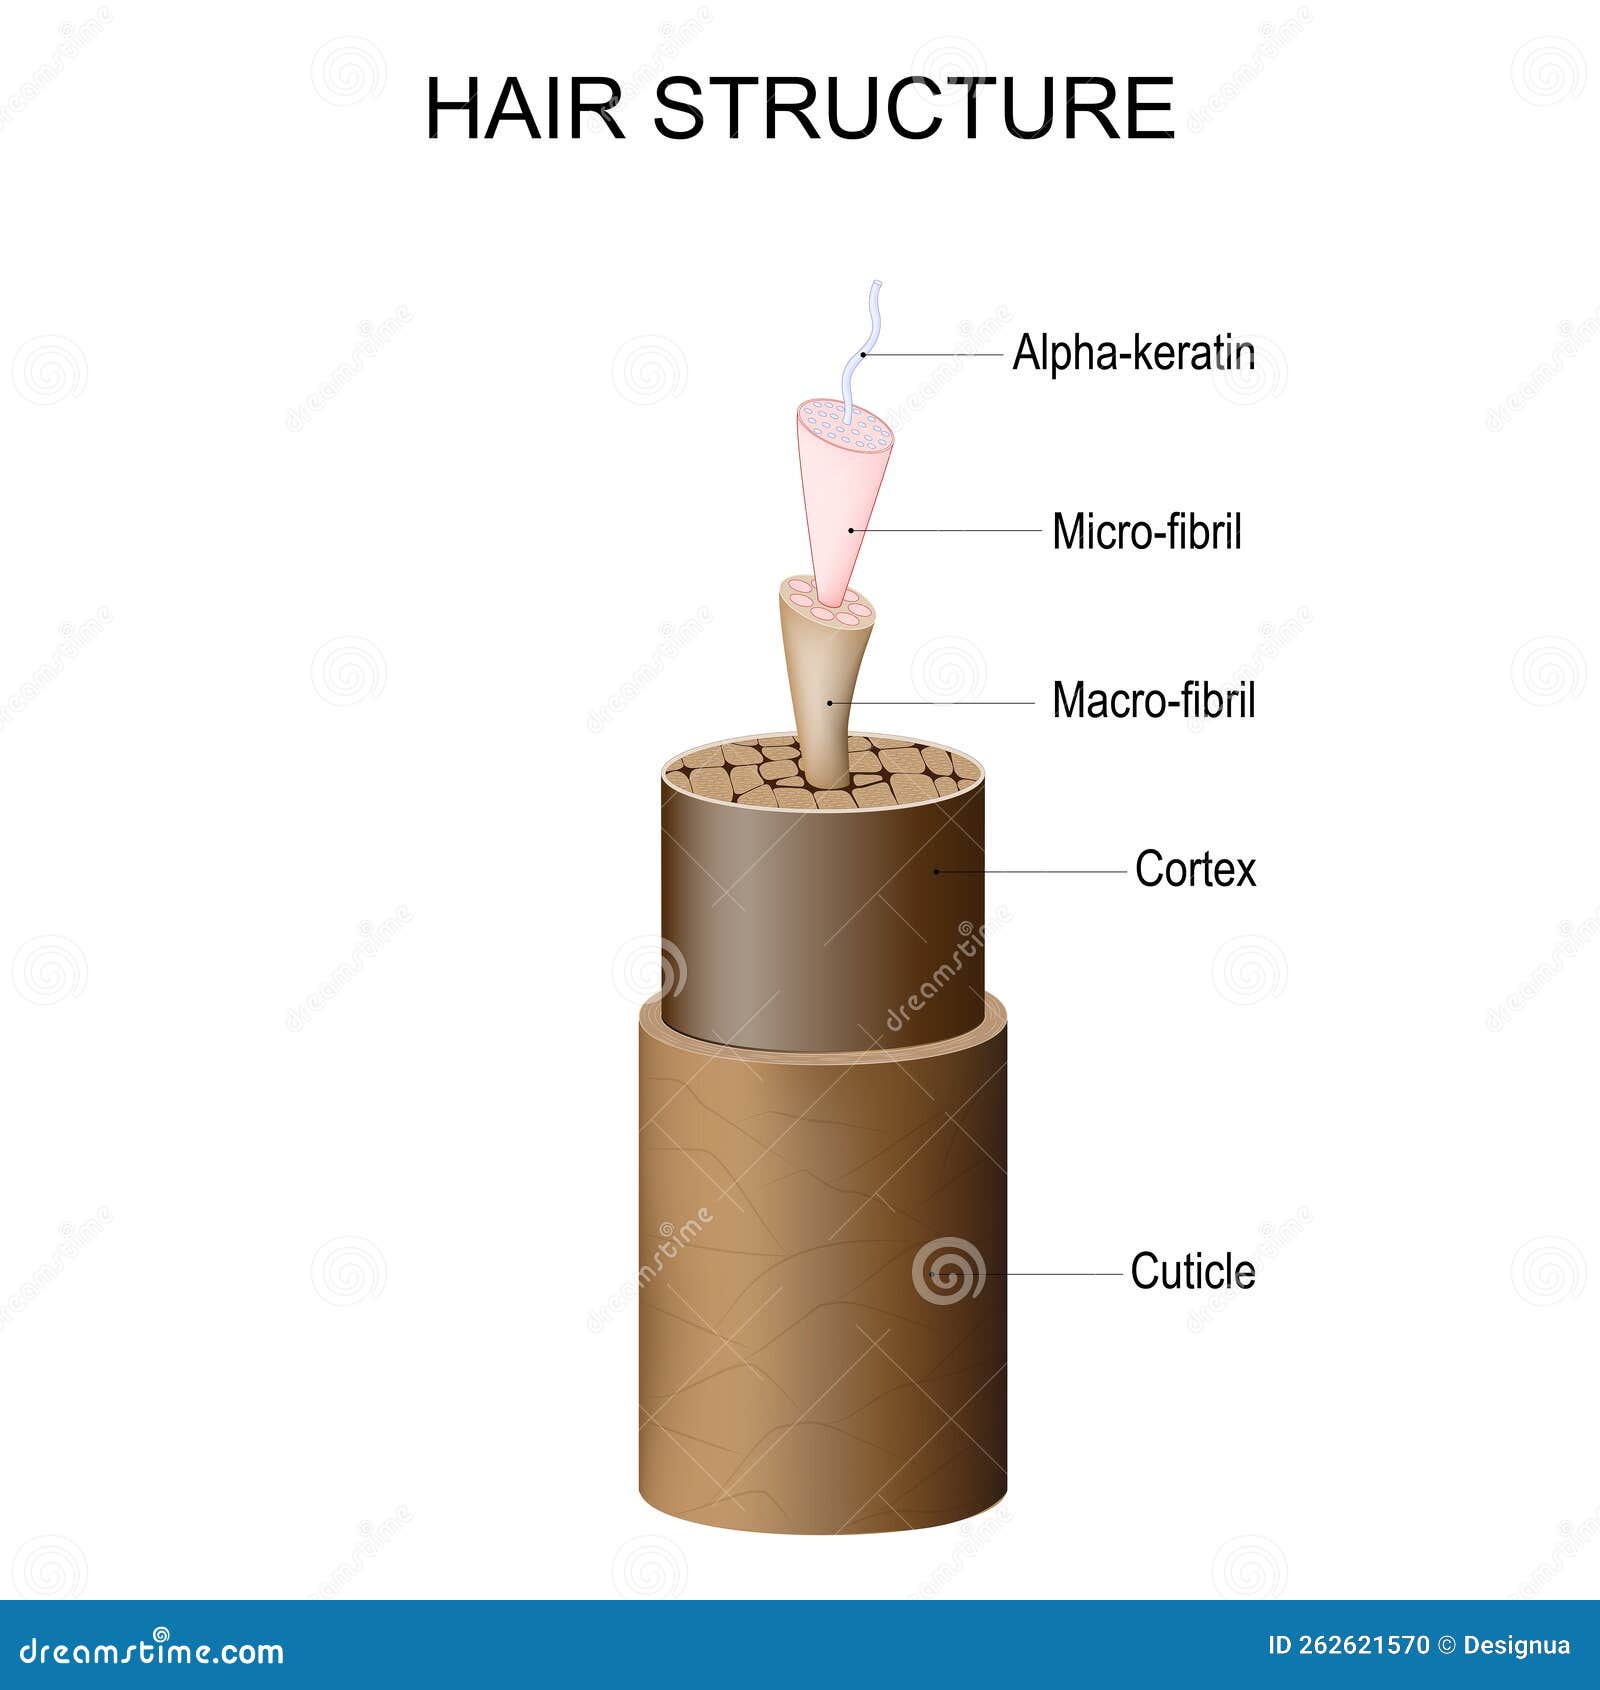 hair structure from cuticle and cortex to micro-fibril, macro-fibril, and alpha-keratin